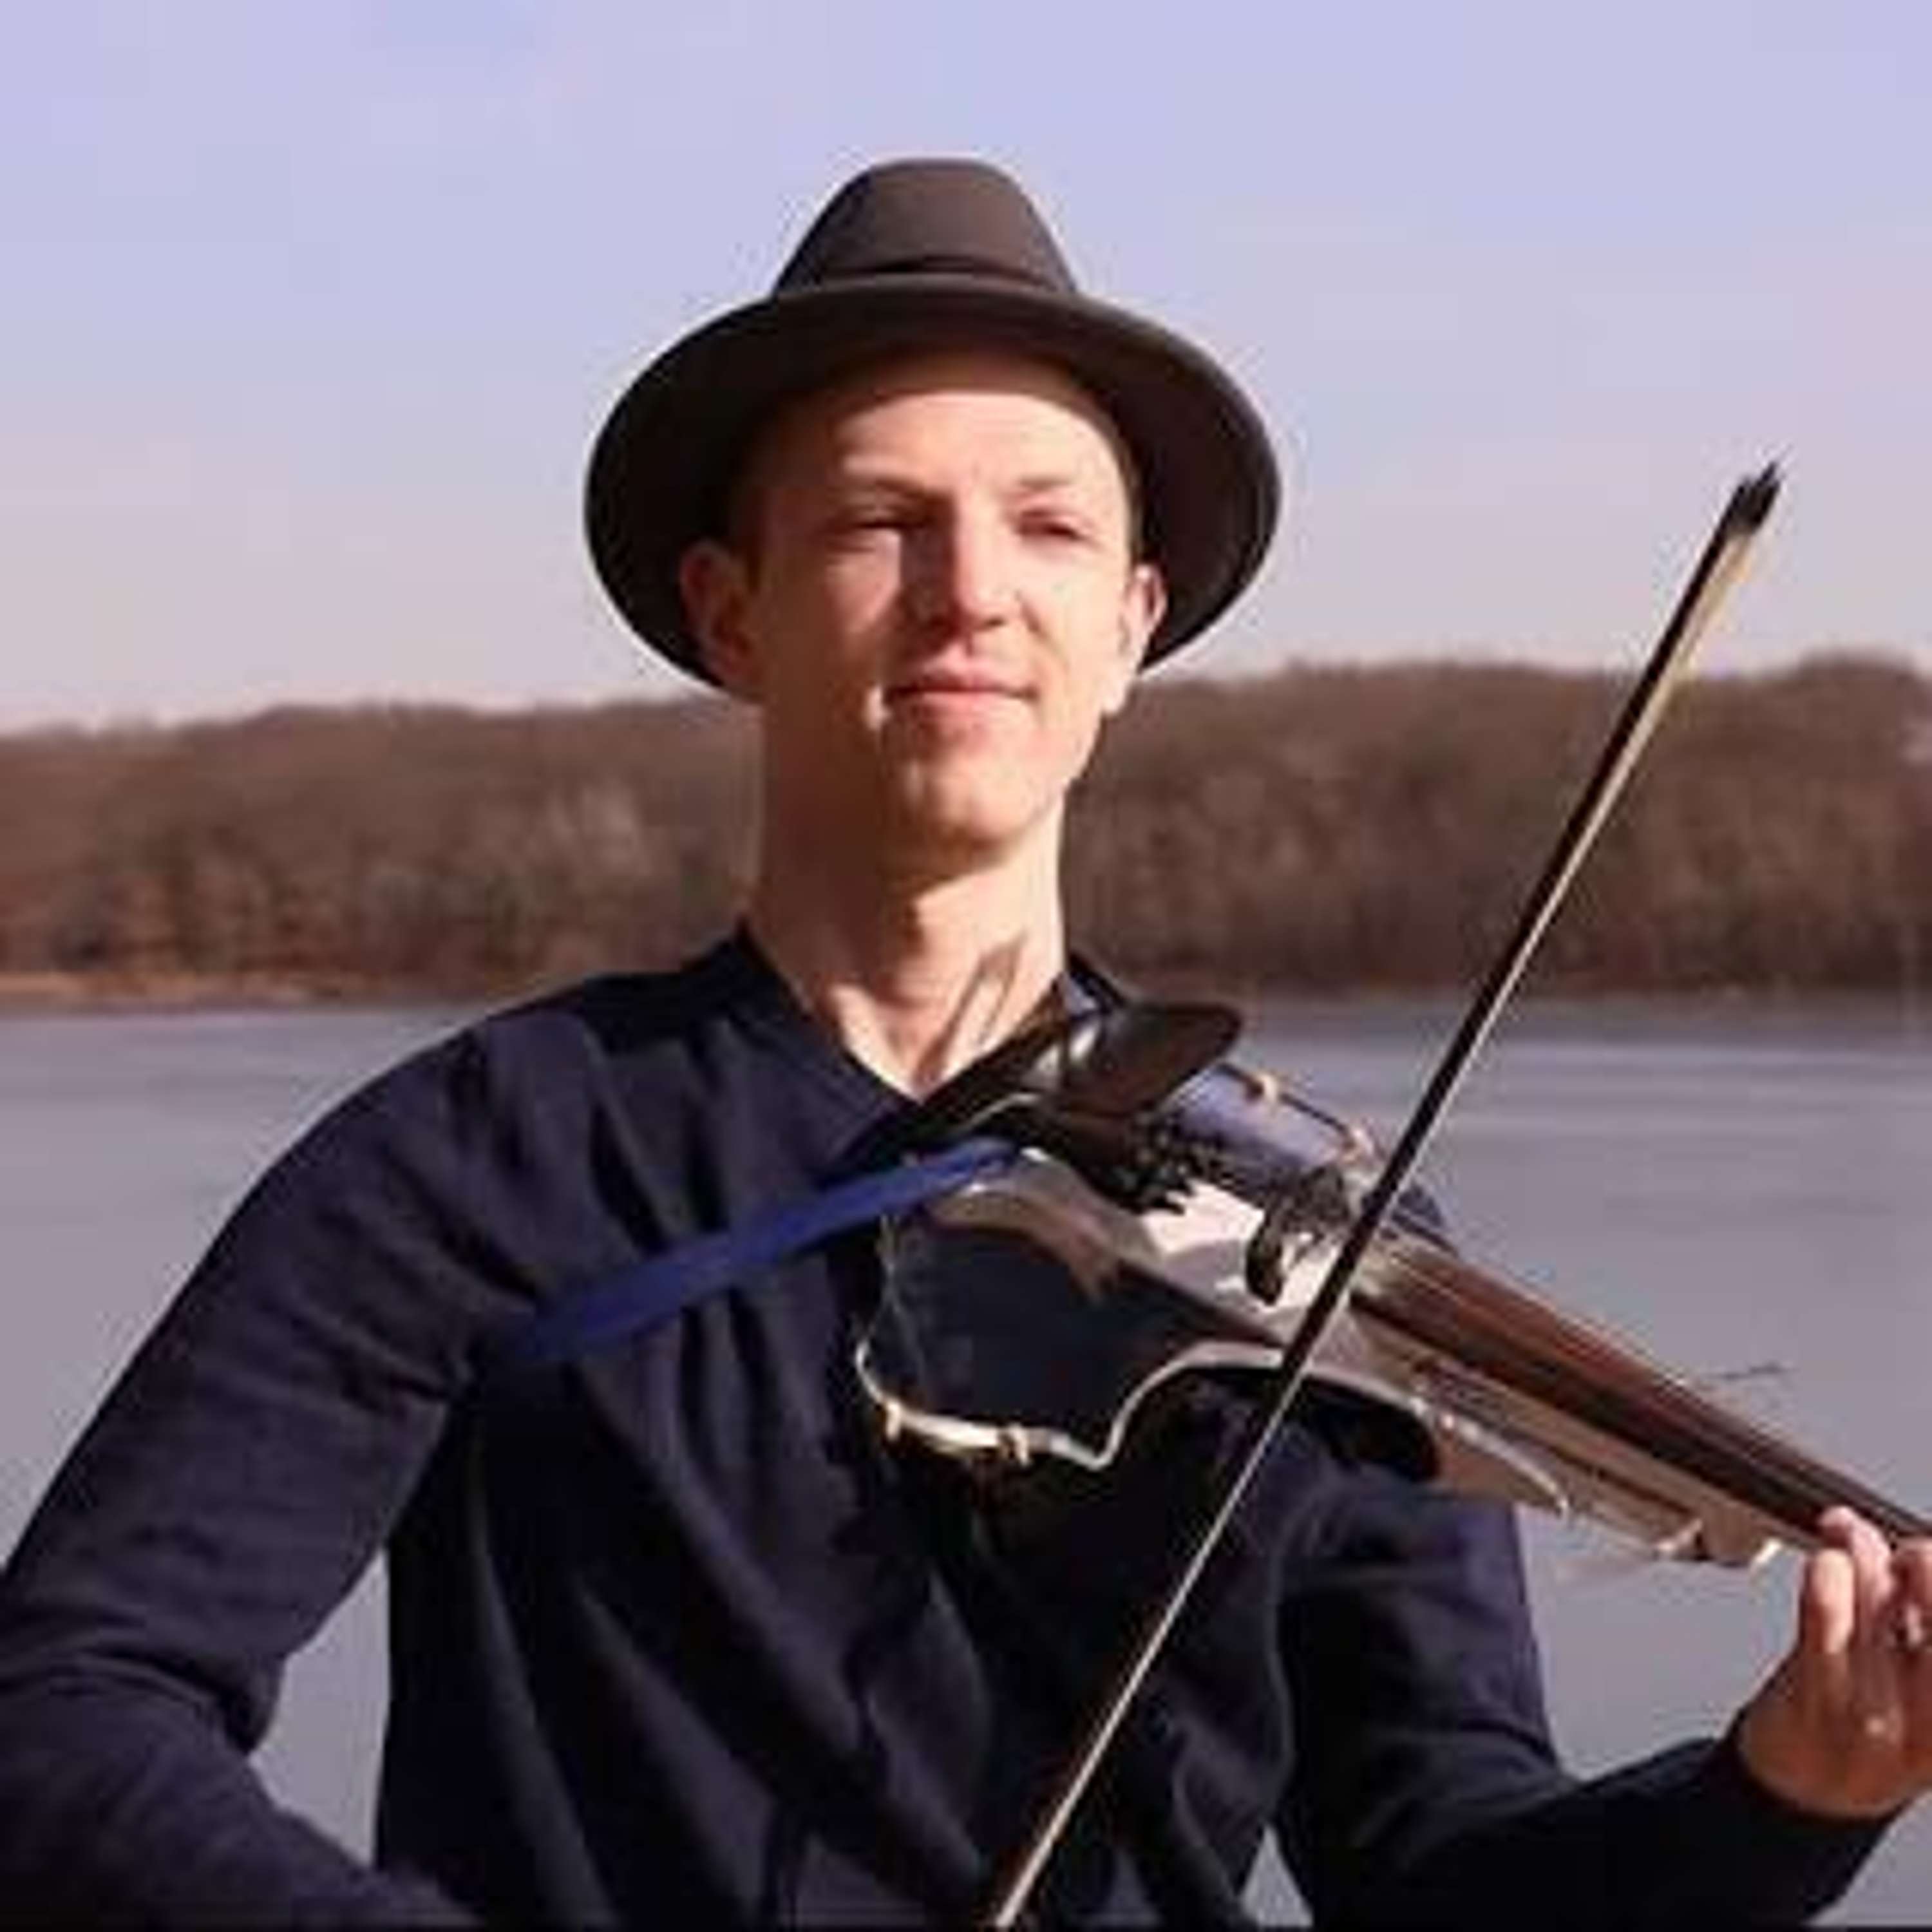 The Comeback of Breakdancing Violinist Asher Laub